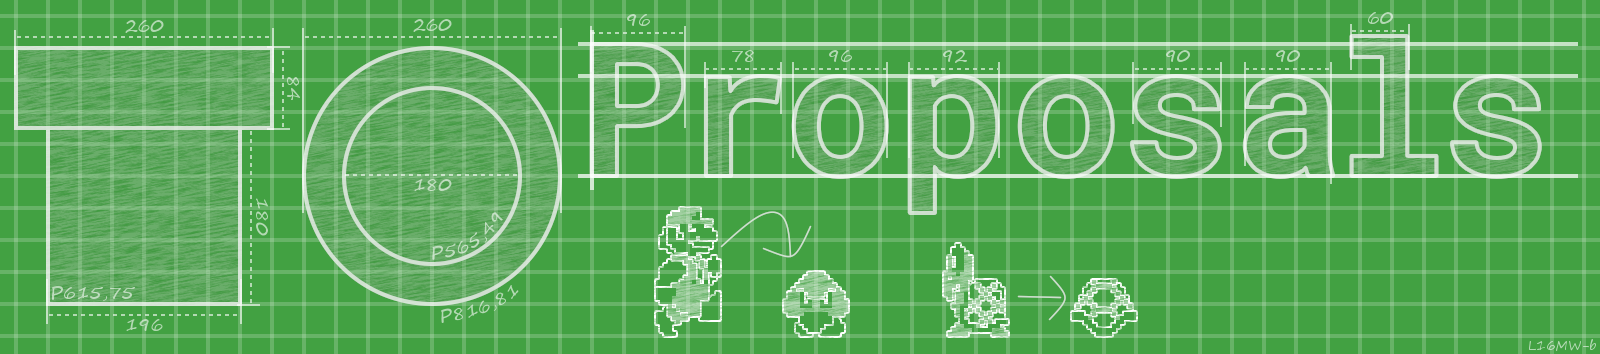 proposalsFull.0.2.png